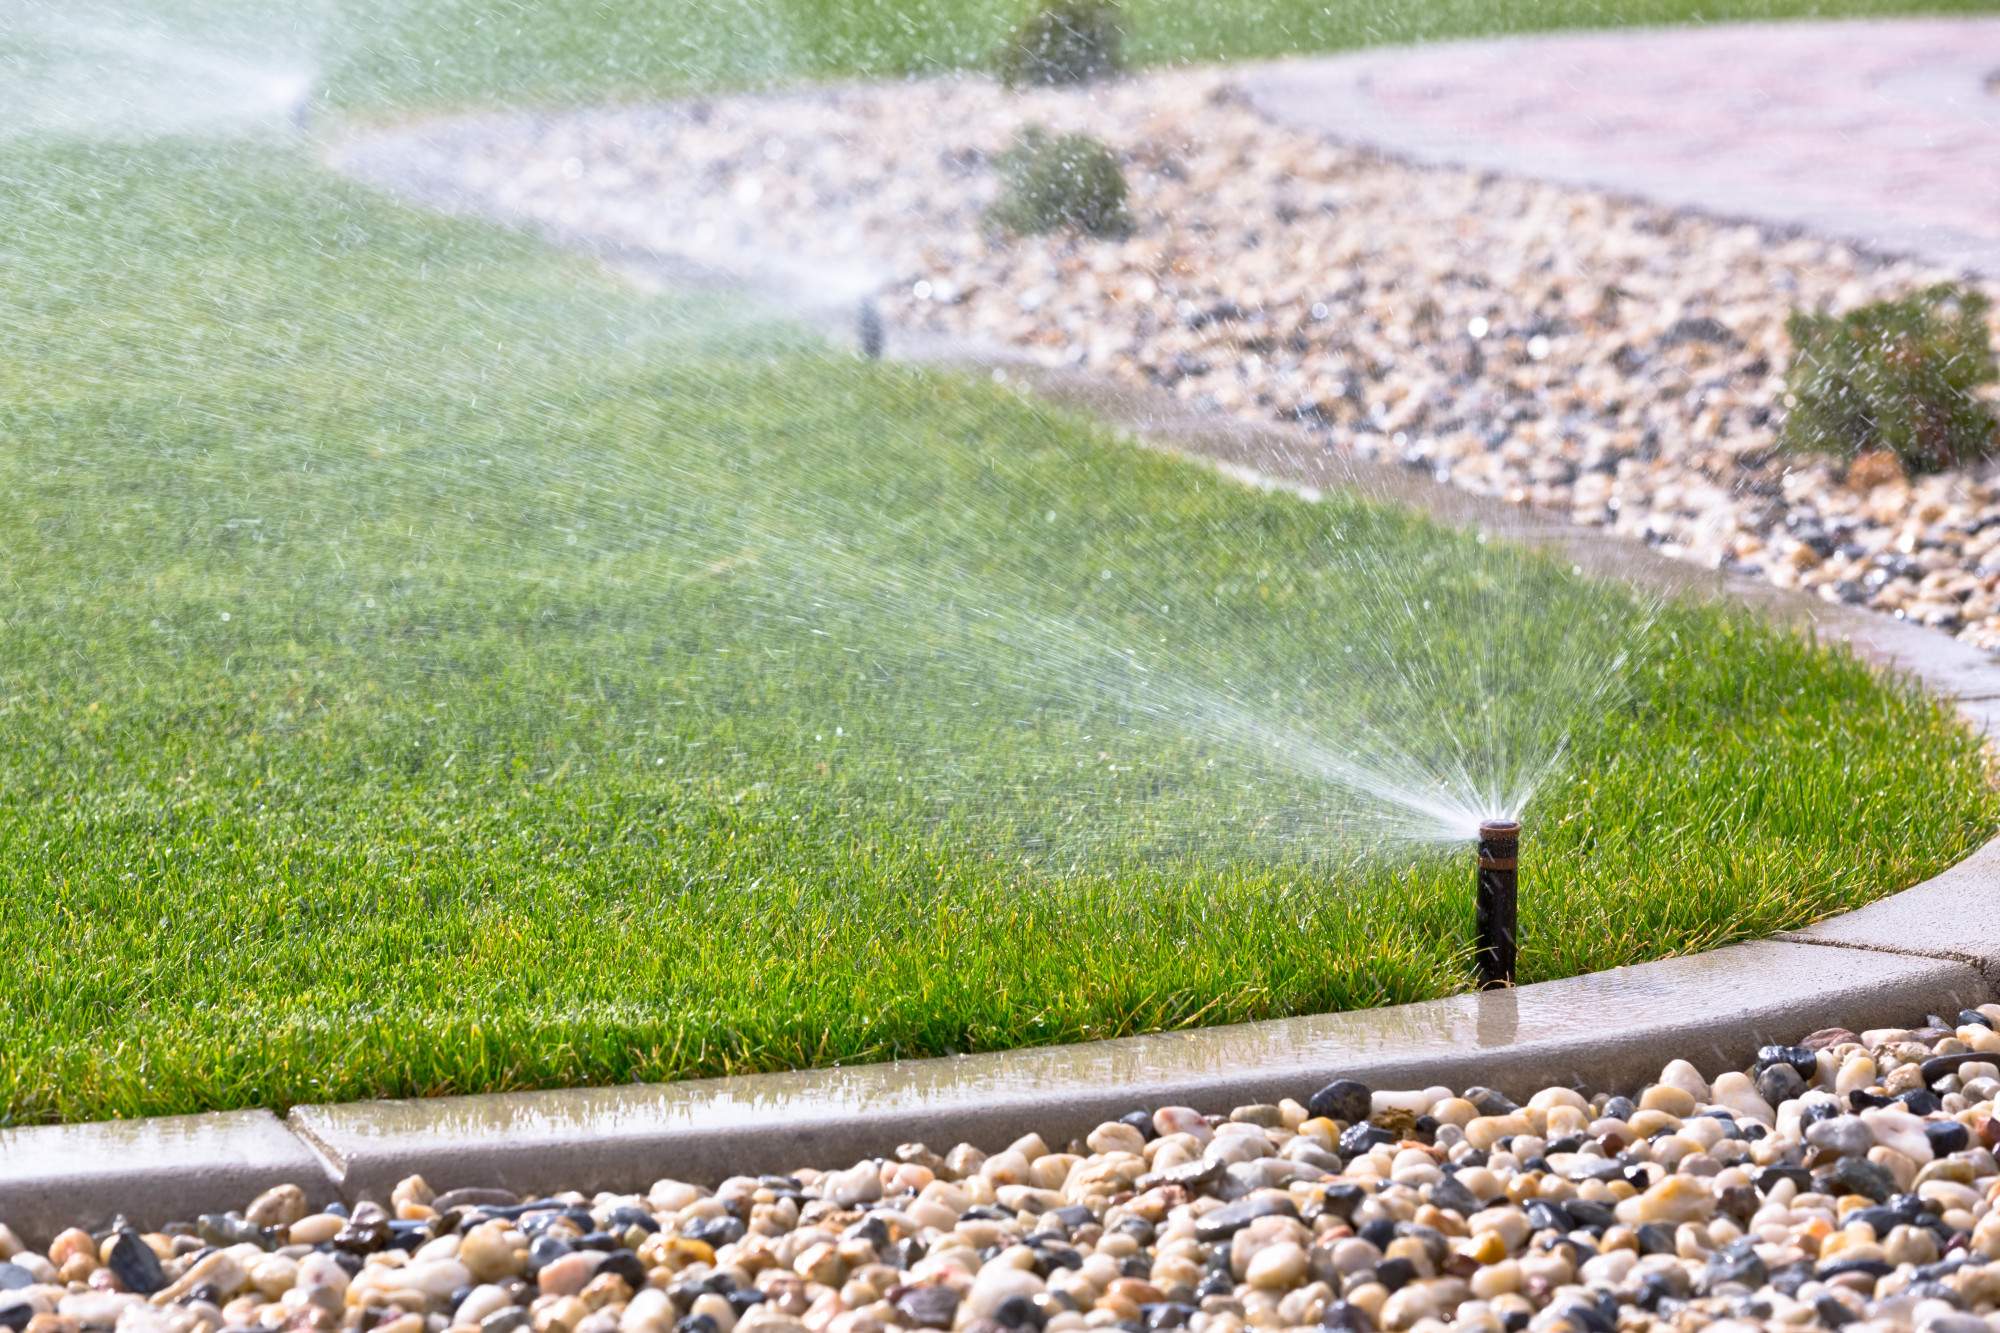 Drip Irrigation vs Sprinkler: What Are the Differences?